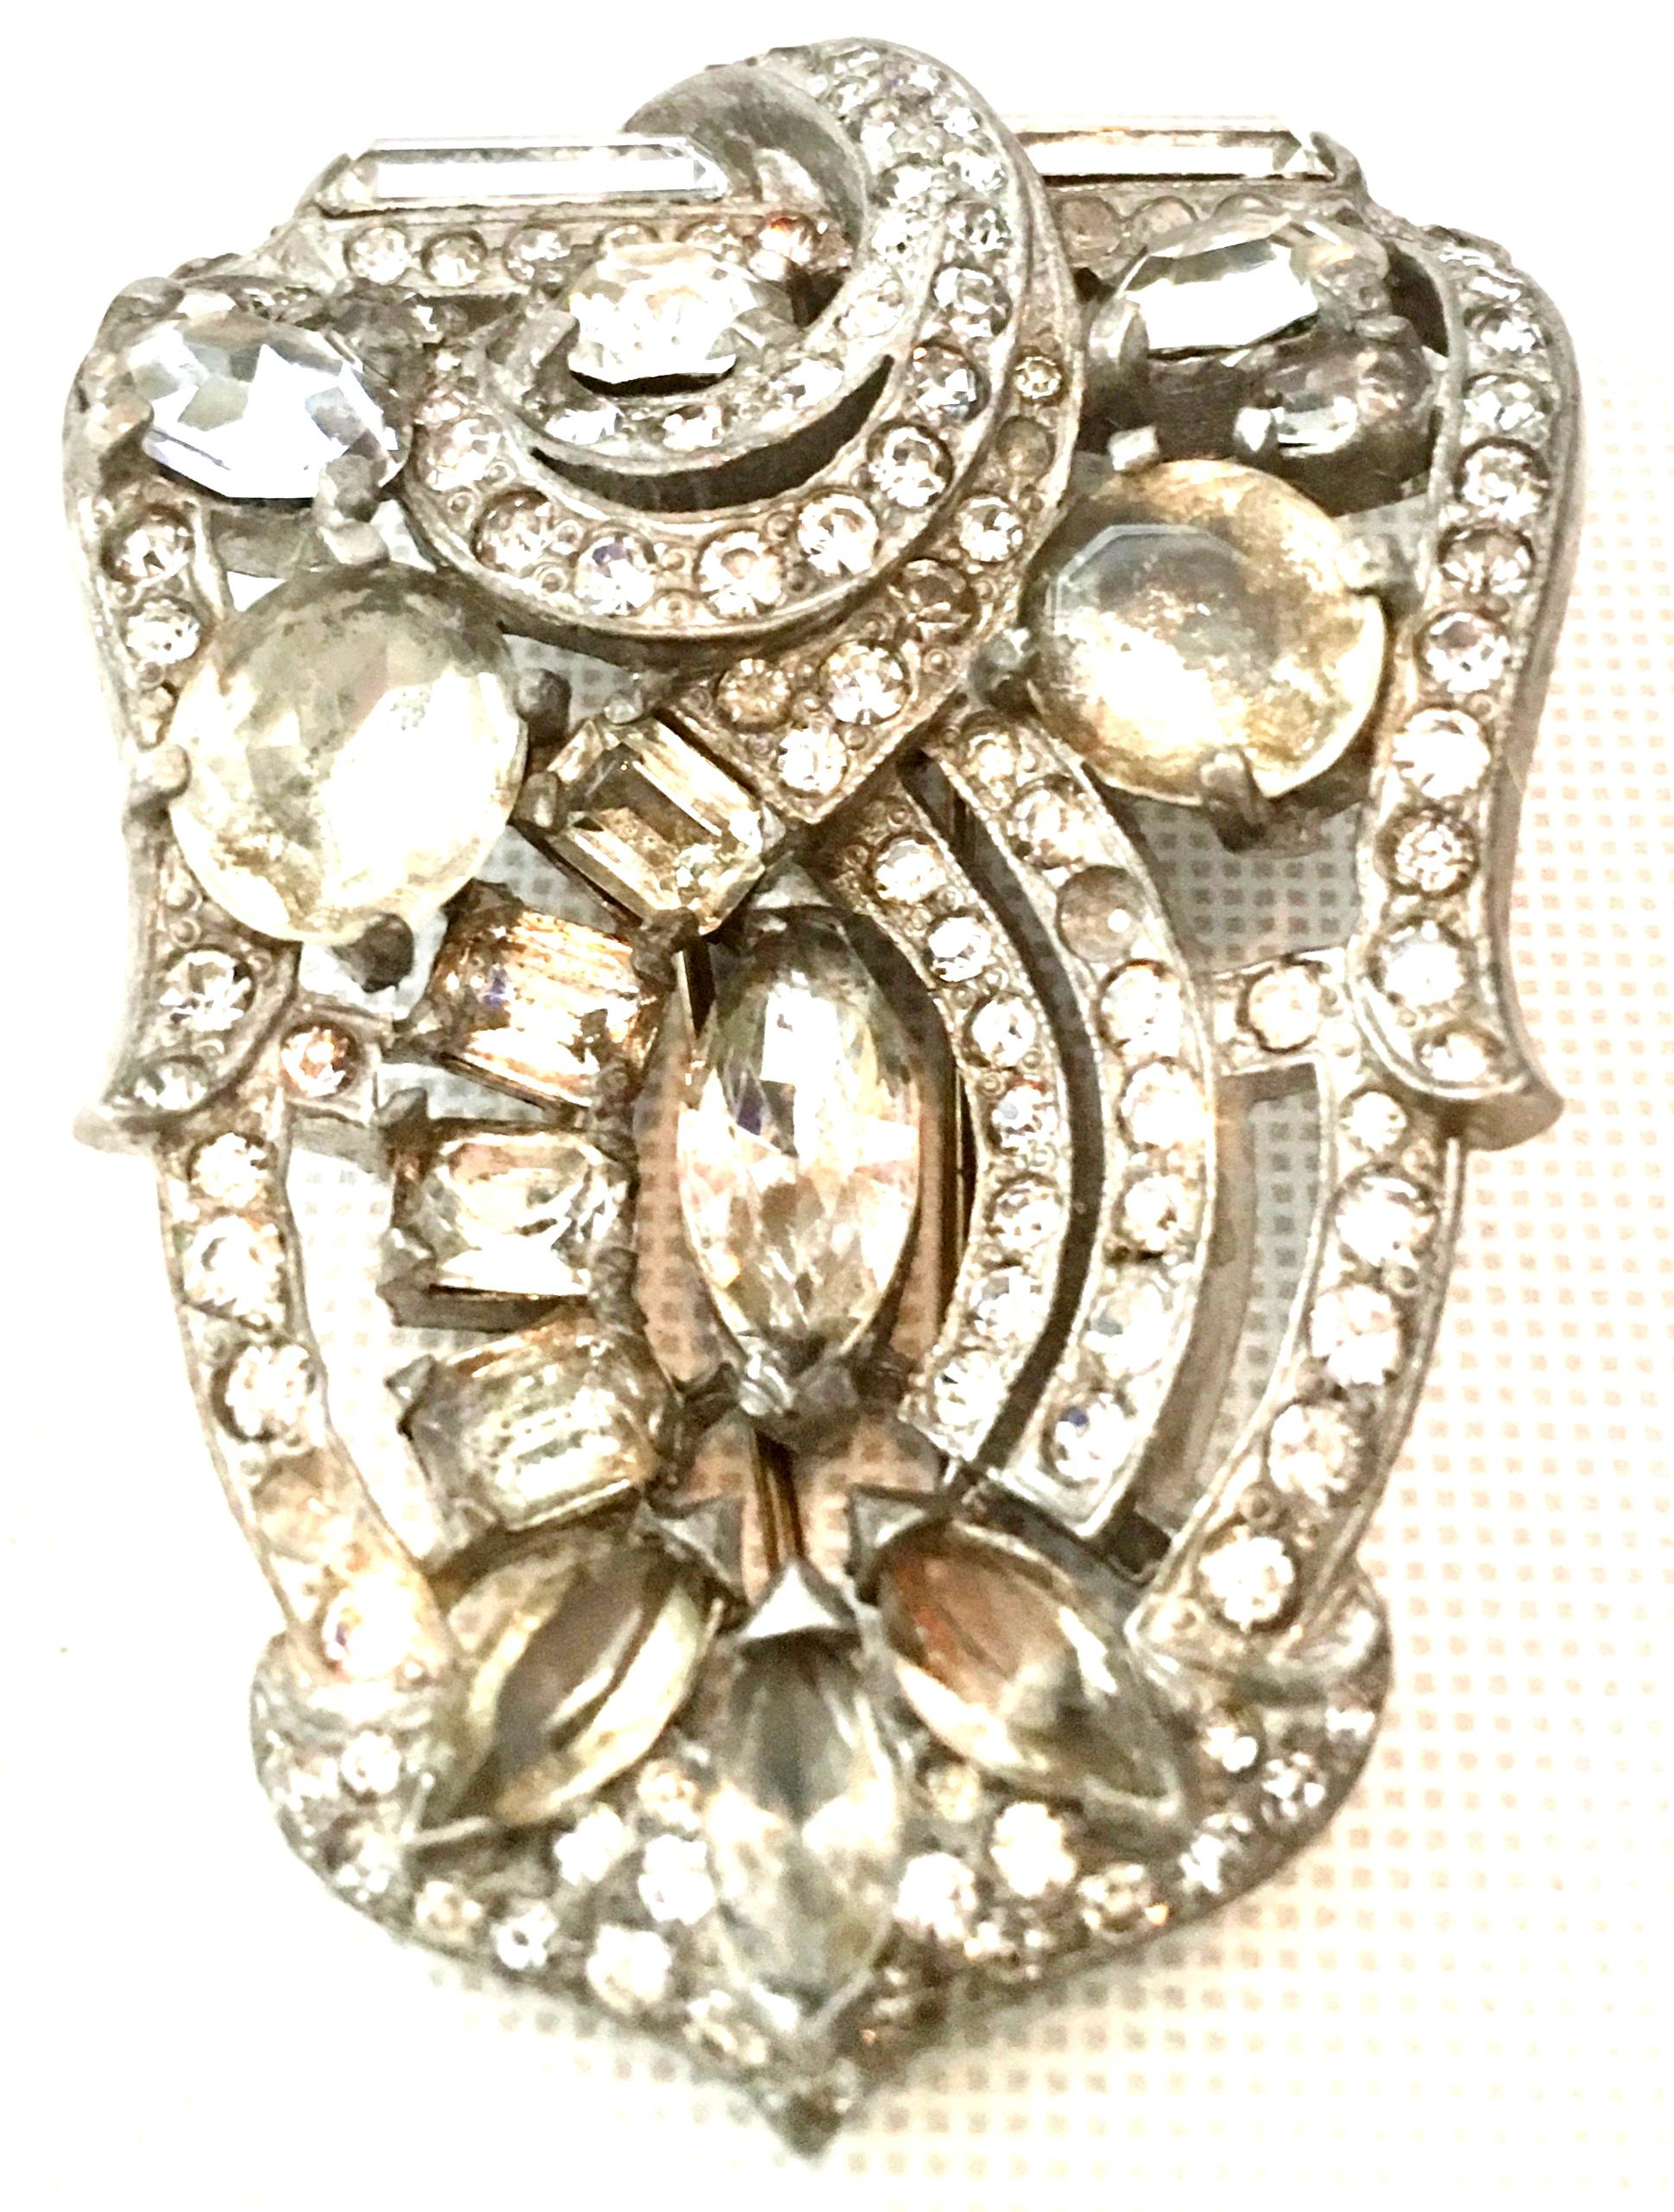  Mid-20th Century Monumental Coveted & Rare Silver Dimensional Swarovski Crystal Fur Clip By, Eisenberg Original. This finely crafted and signed piece features a silver plate base metal with Swarovski crystal bezel and prong set clear and darker